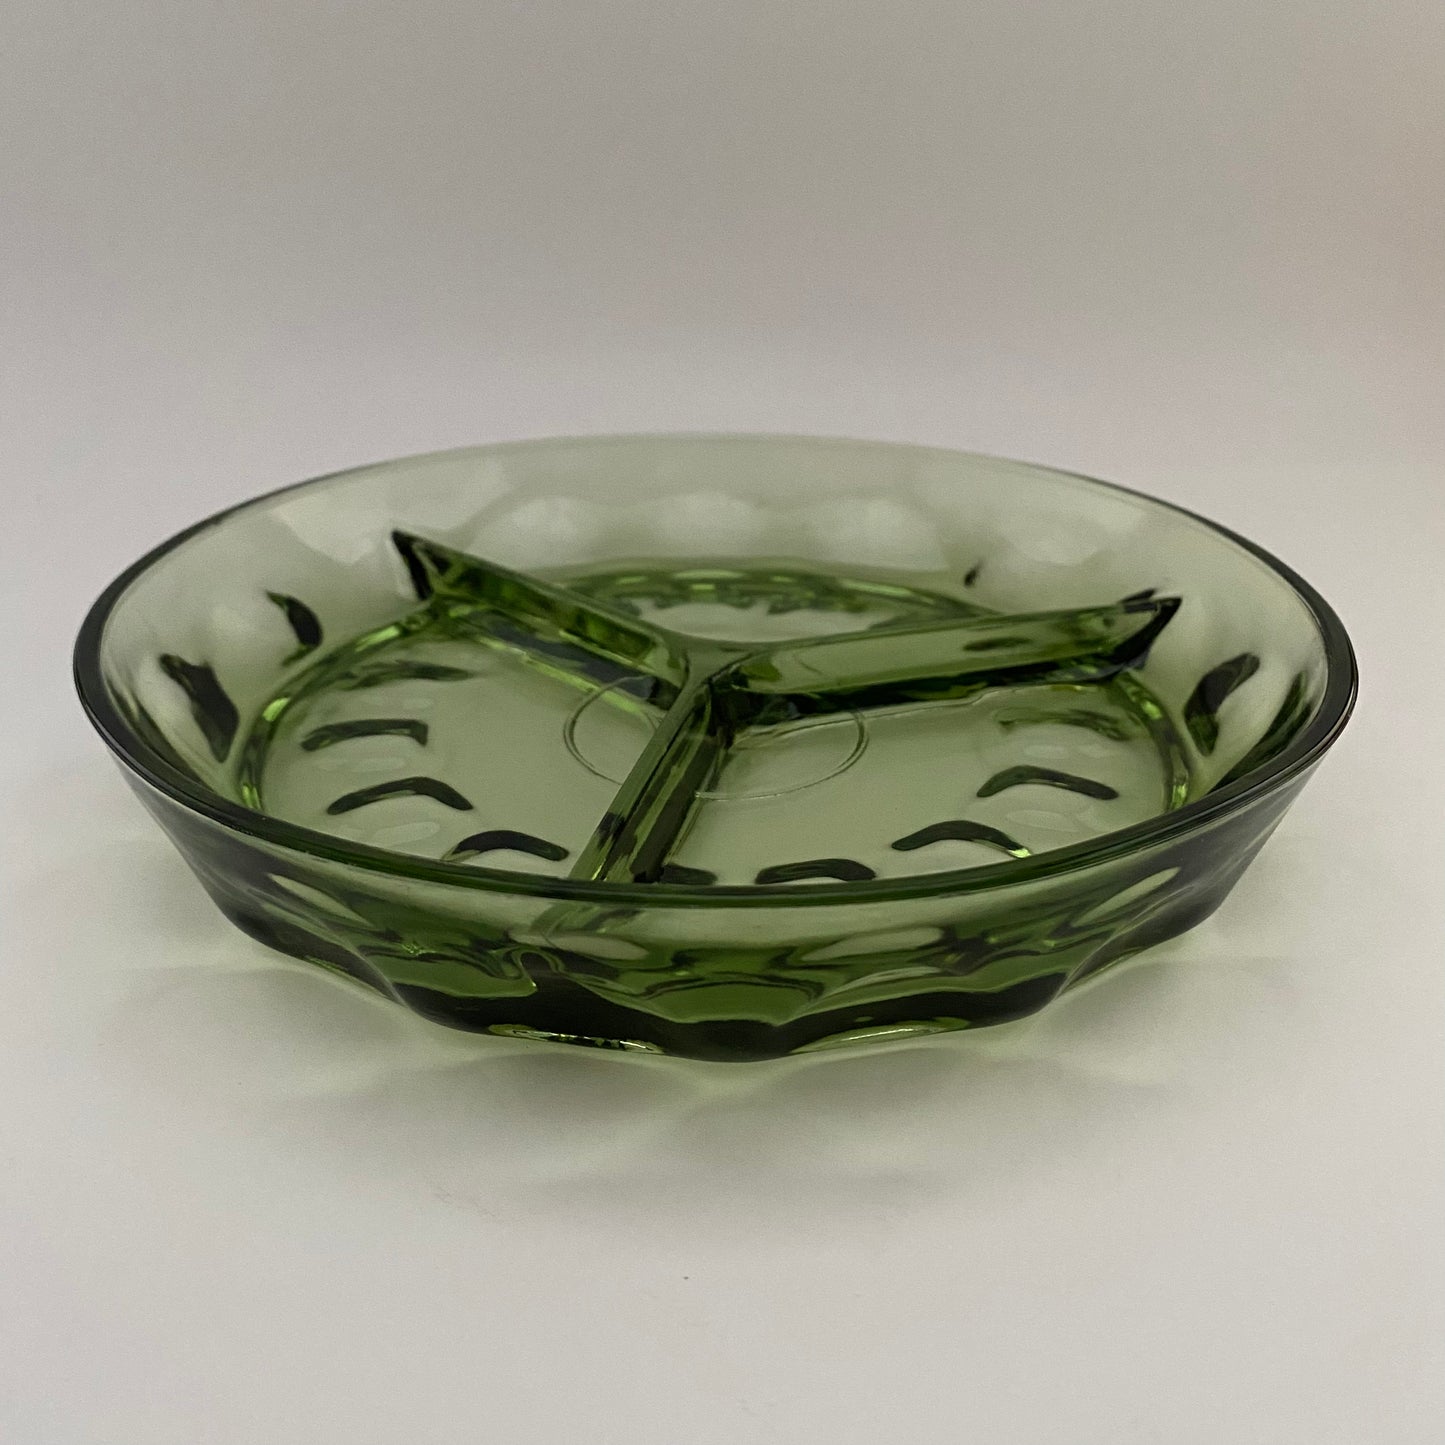 Late 60s/ Early 70s Green Glass Divided Dish